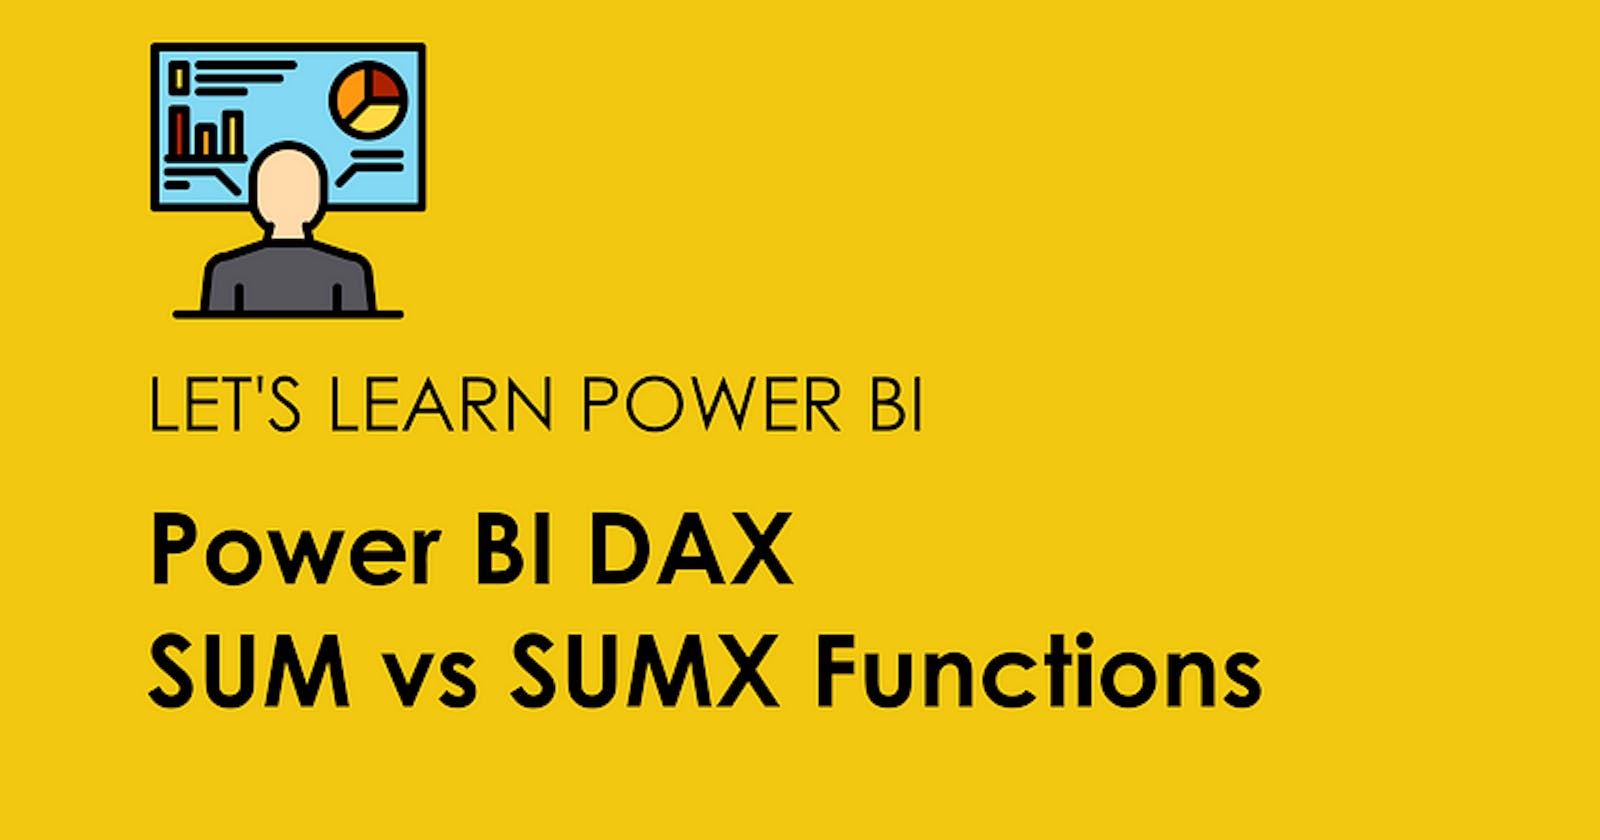 Power BI DAX — Let’s Understand the Difference Between SUM and SUMX